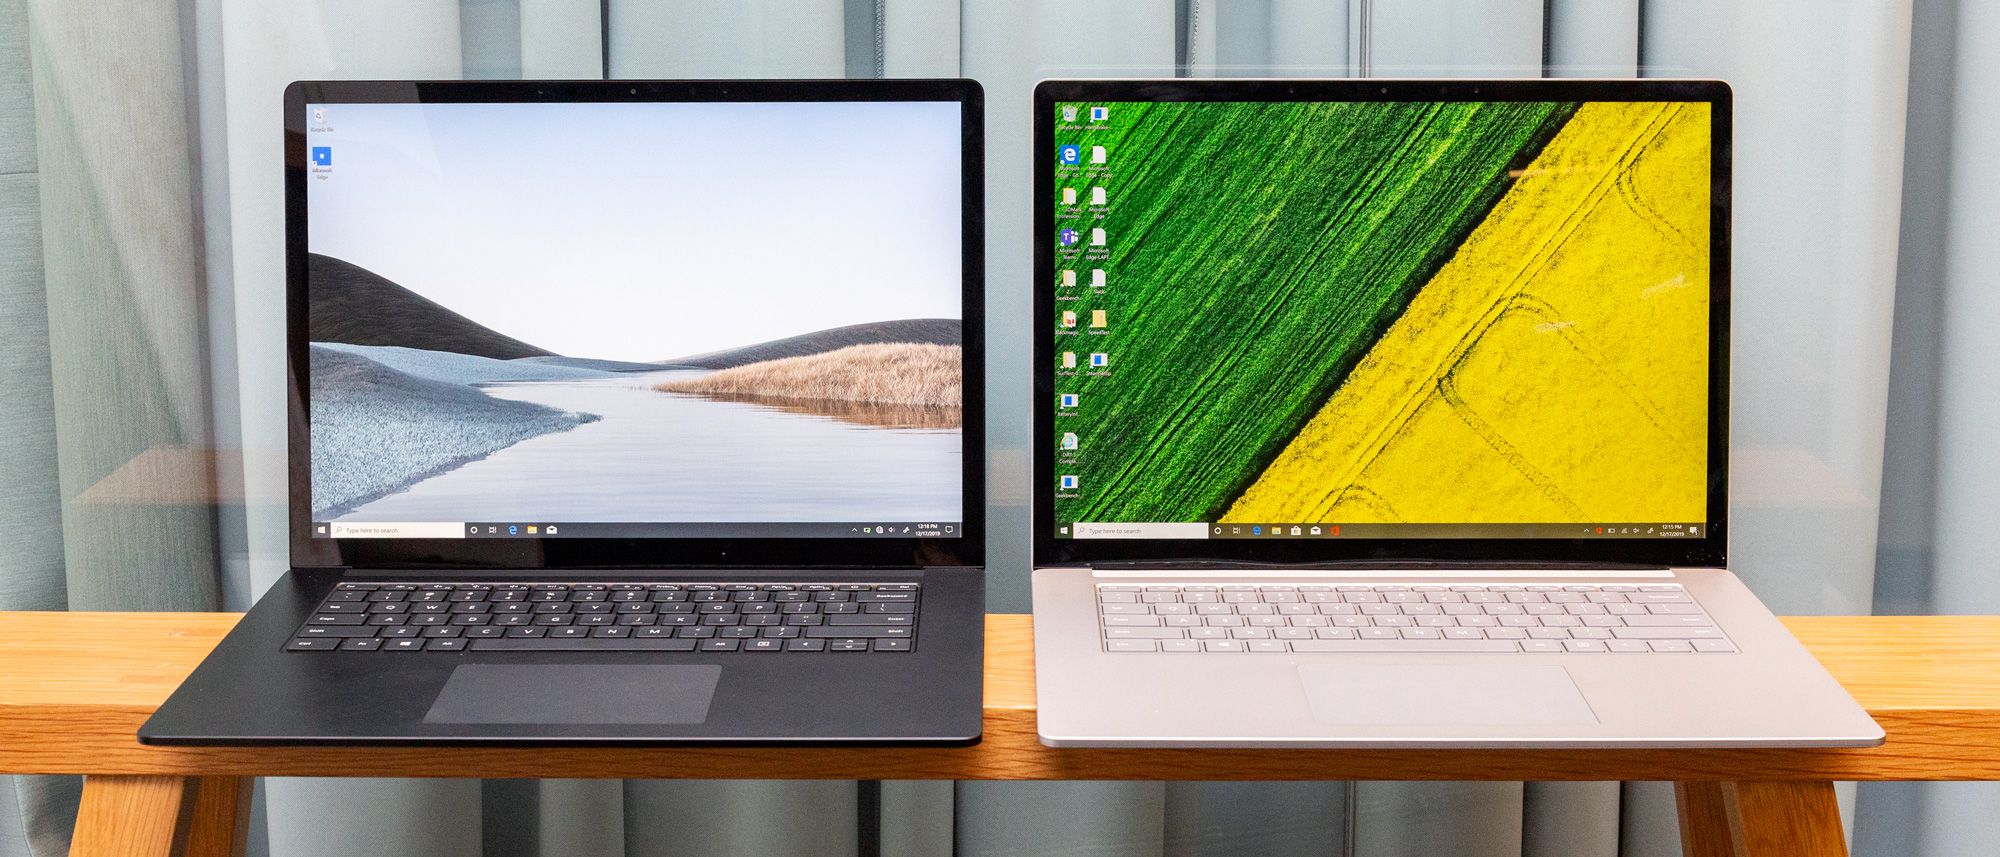 Surface Laptop 3 Amd Vs Intel Don T Buy The Wrong One Laptop Mag